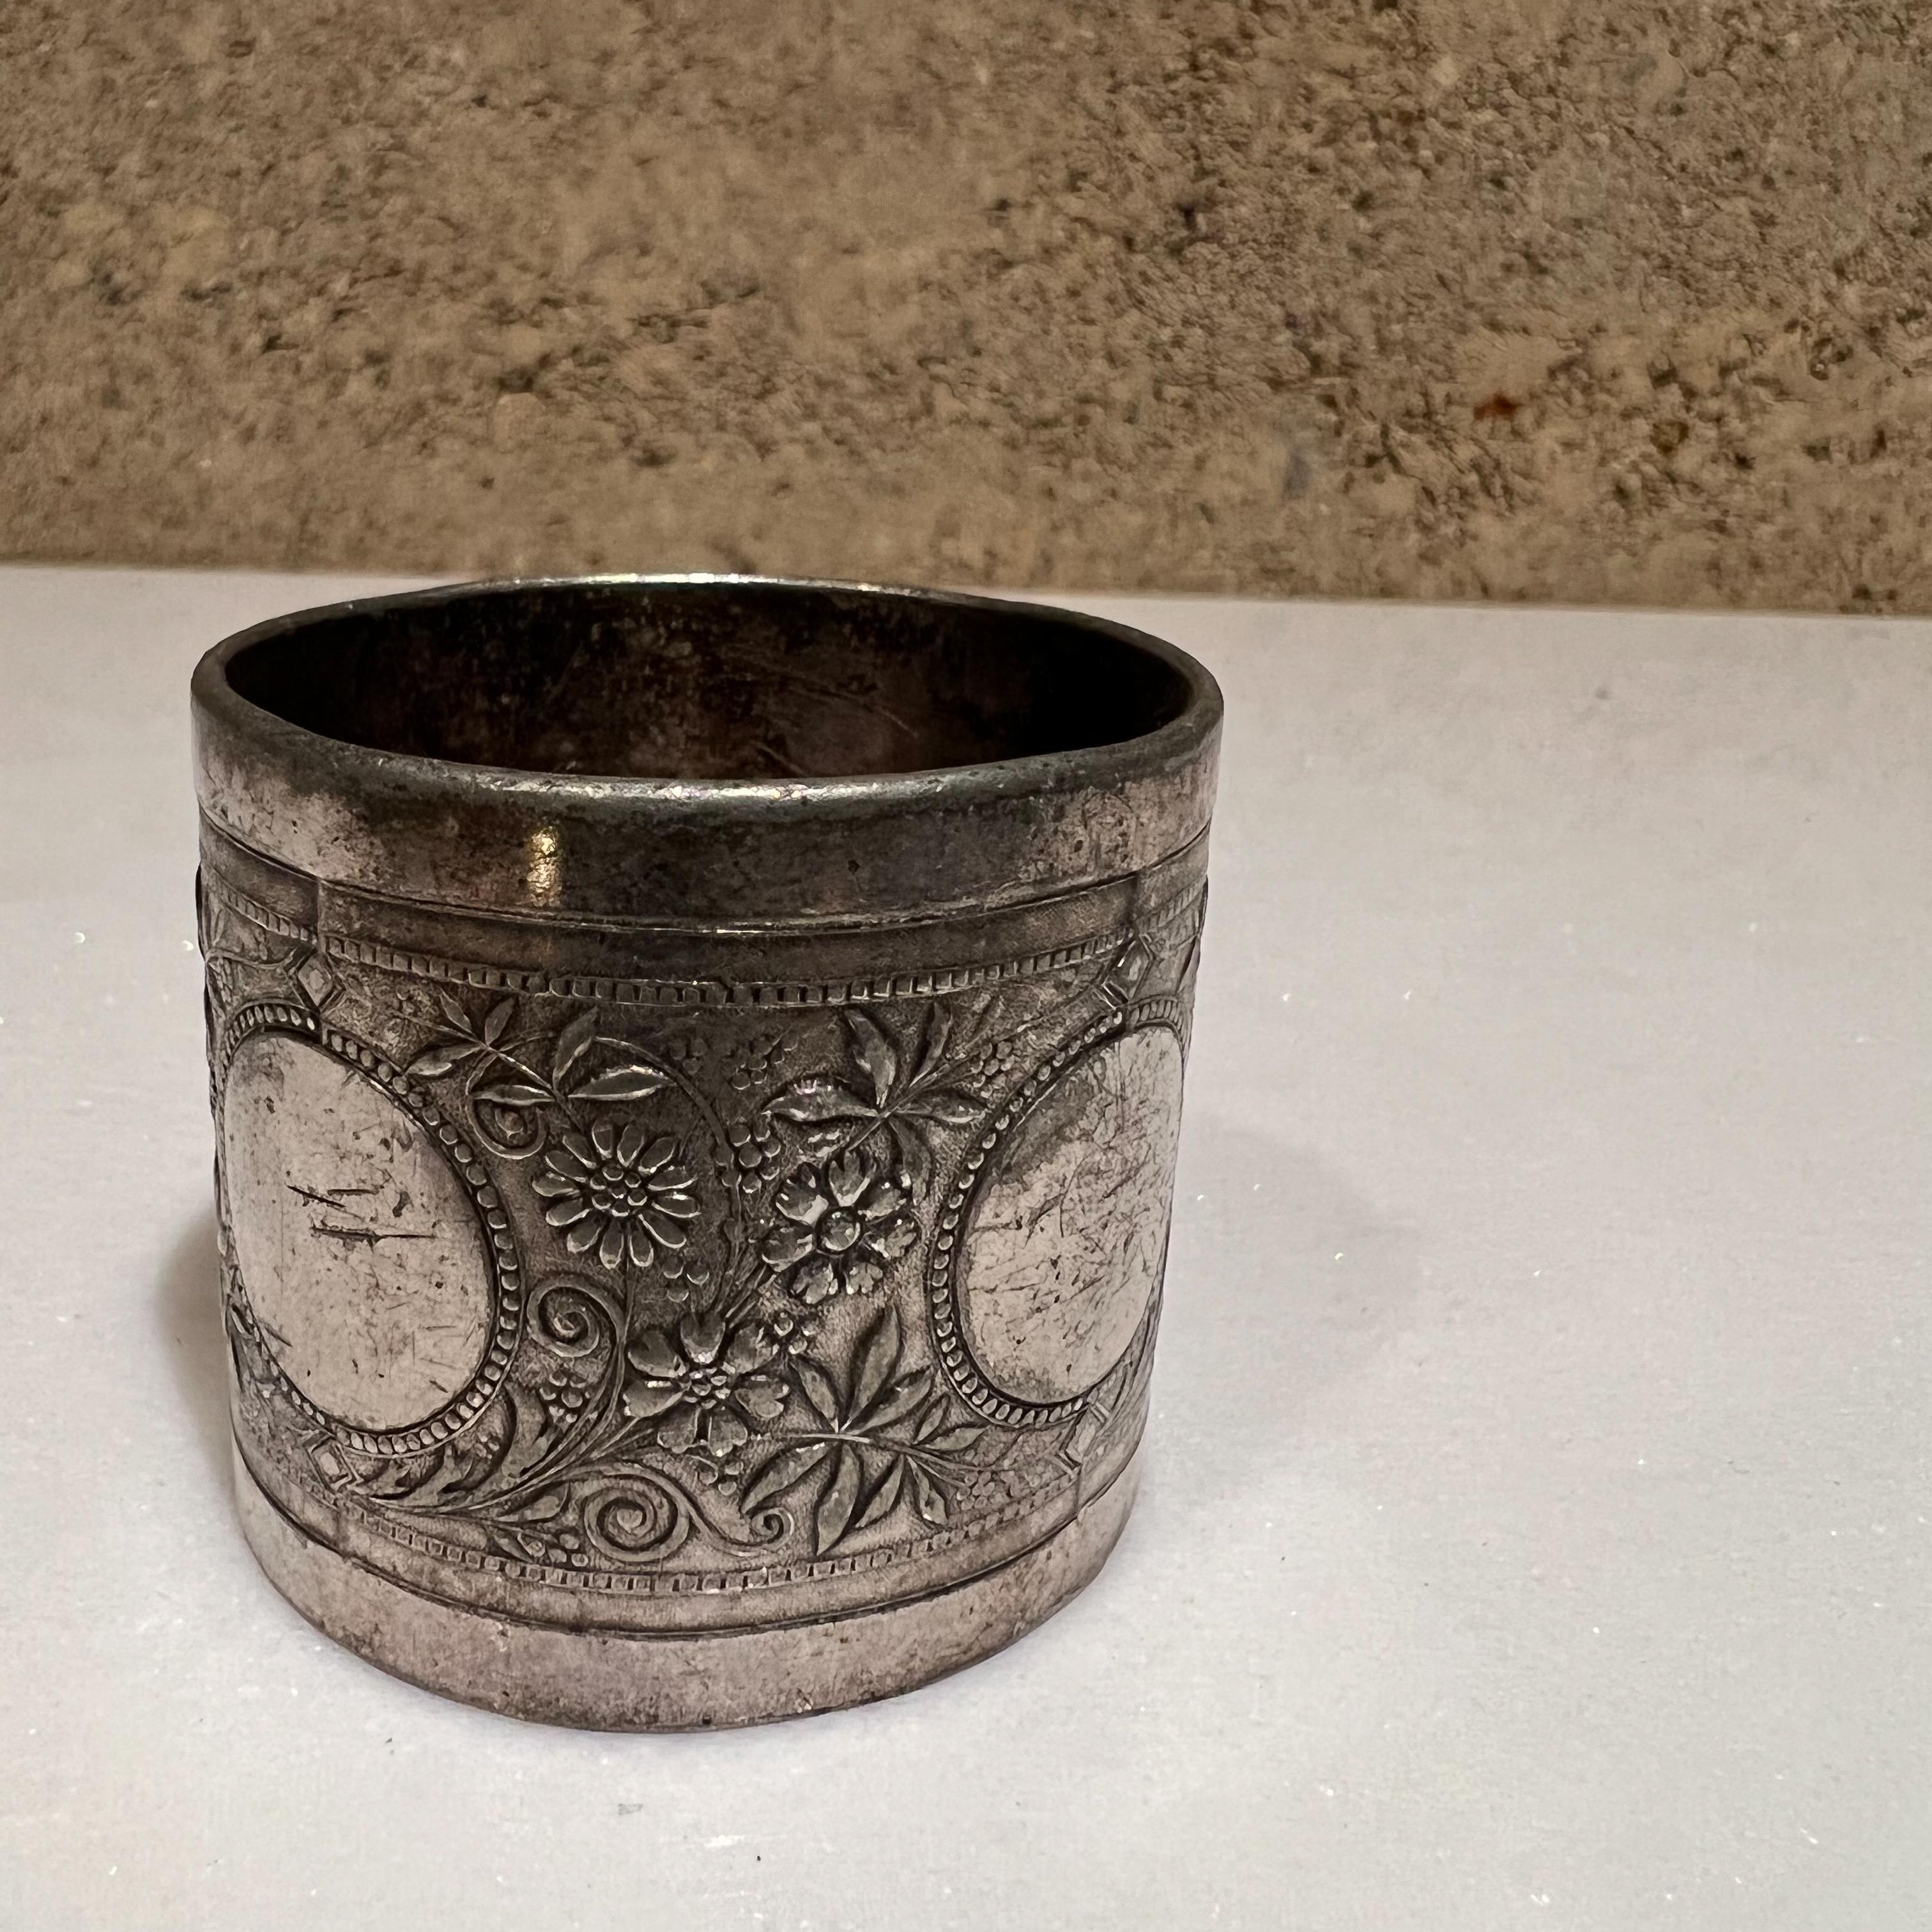 Silver Plate Antique Vintage Silverplated Napkin Ring Holder Pretty Gay Floral